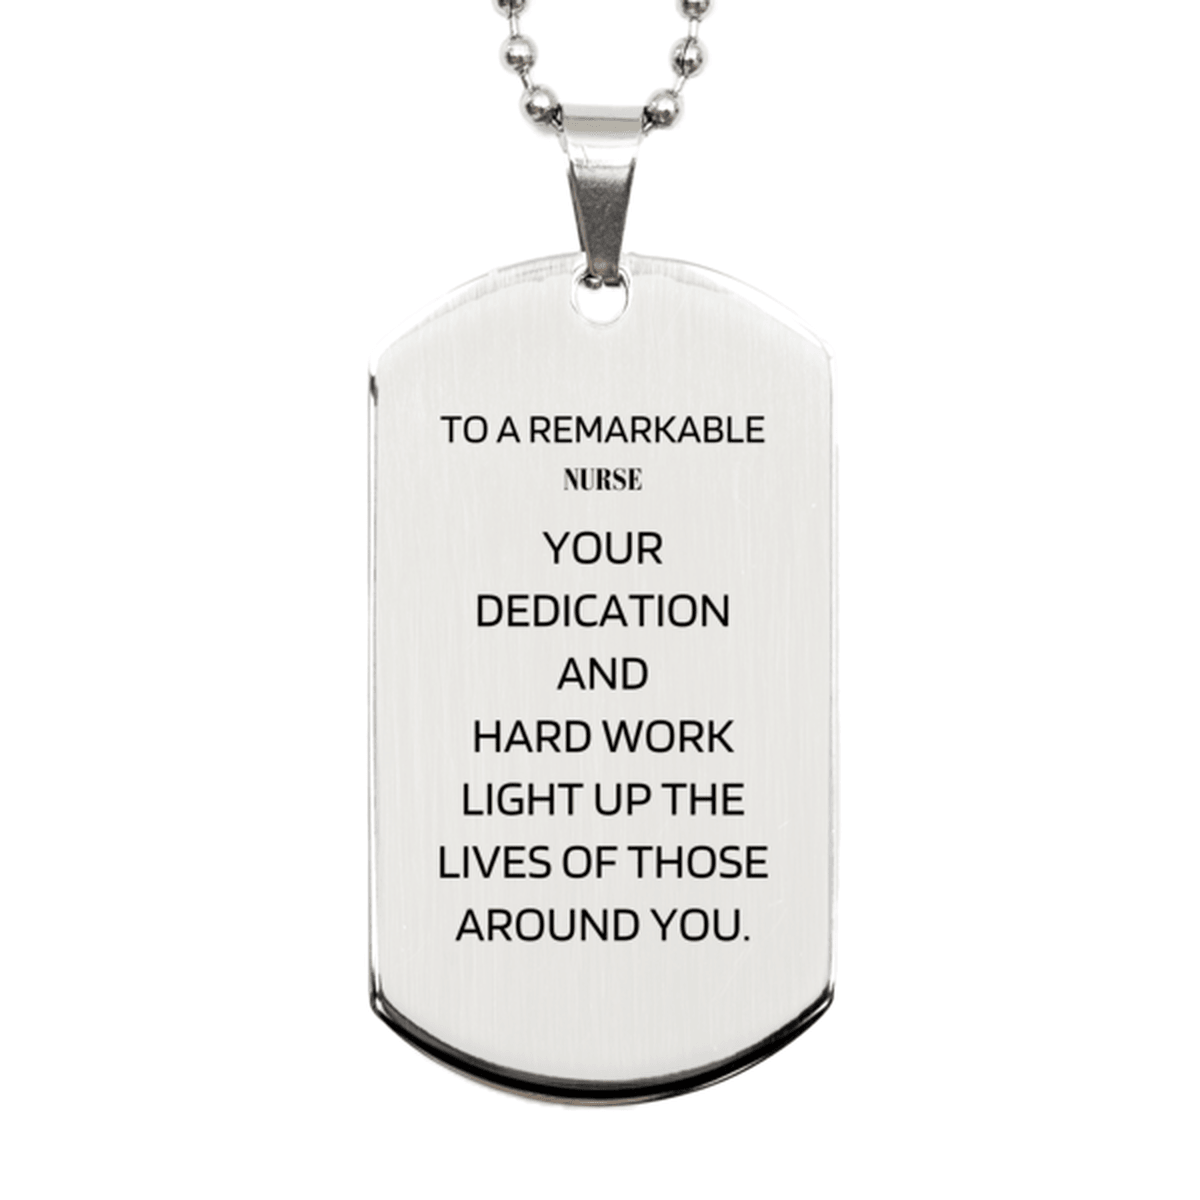 Remarkable Nurse Gifts, Your dedication and hard work, Inspirational Birthday Christmas Unique Silver Dog Tag For Nurse, Coworkers, Men, Women, Friends - Mallard Moon Gift Shop